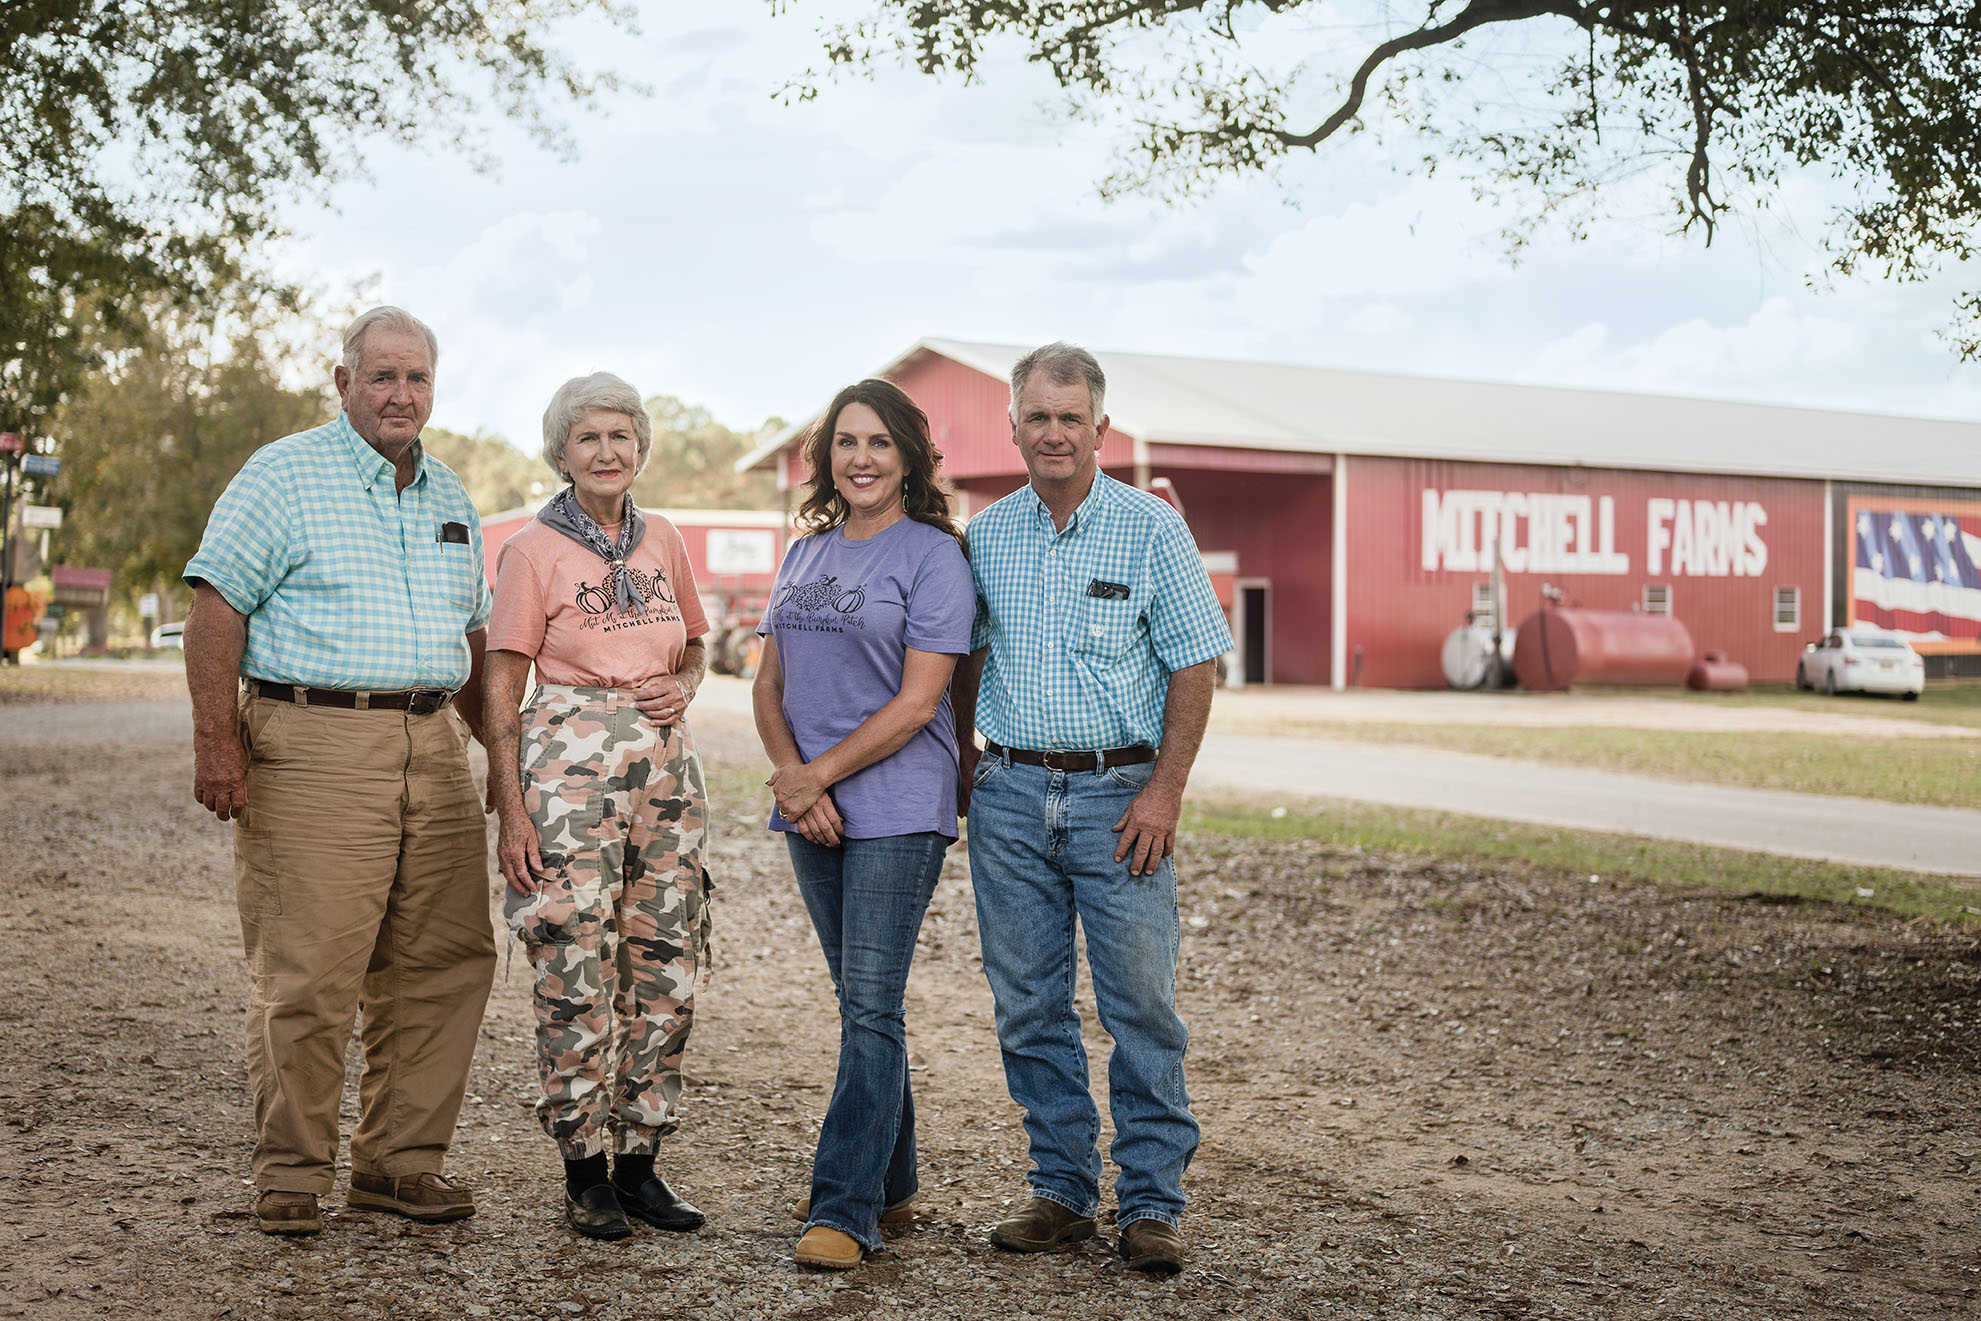 Dennis and Nelda Mitchell have been farming for more than 60 years. Their son, Don (right), runs their peanut farm, and his wife, Jo Lynn (second from right), focuses on agritourism.